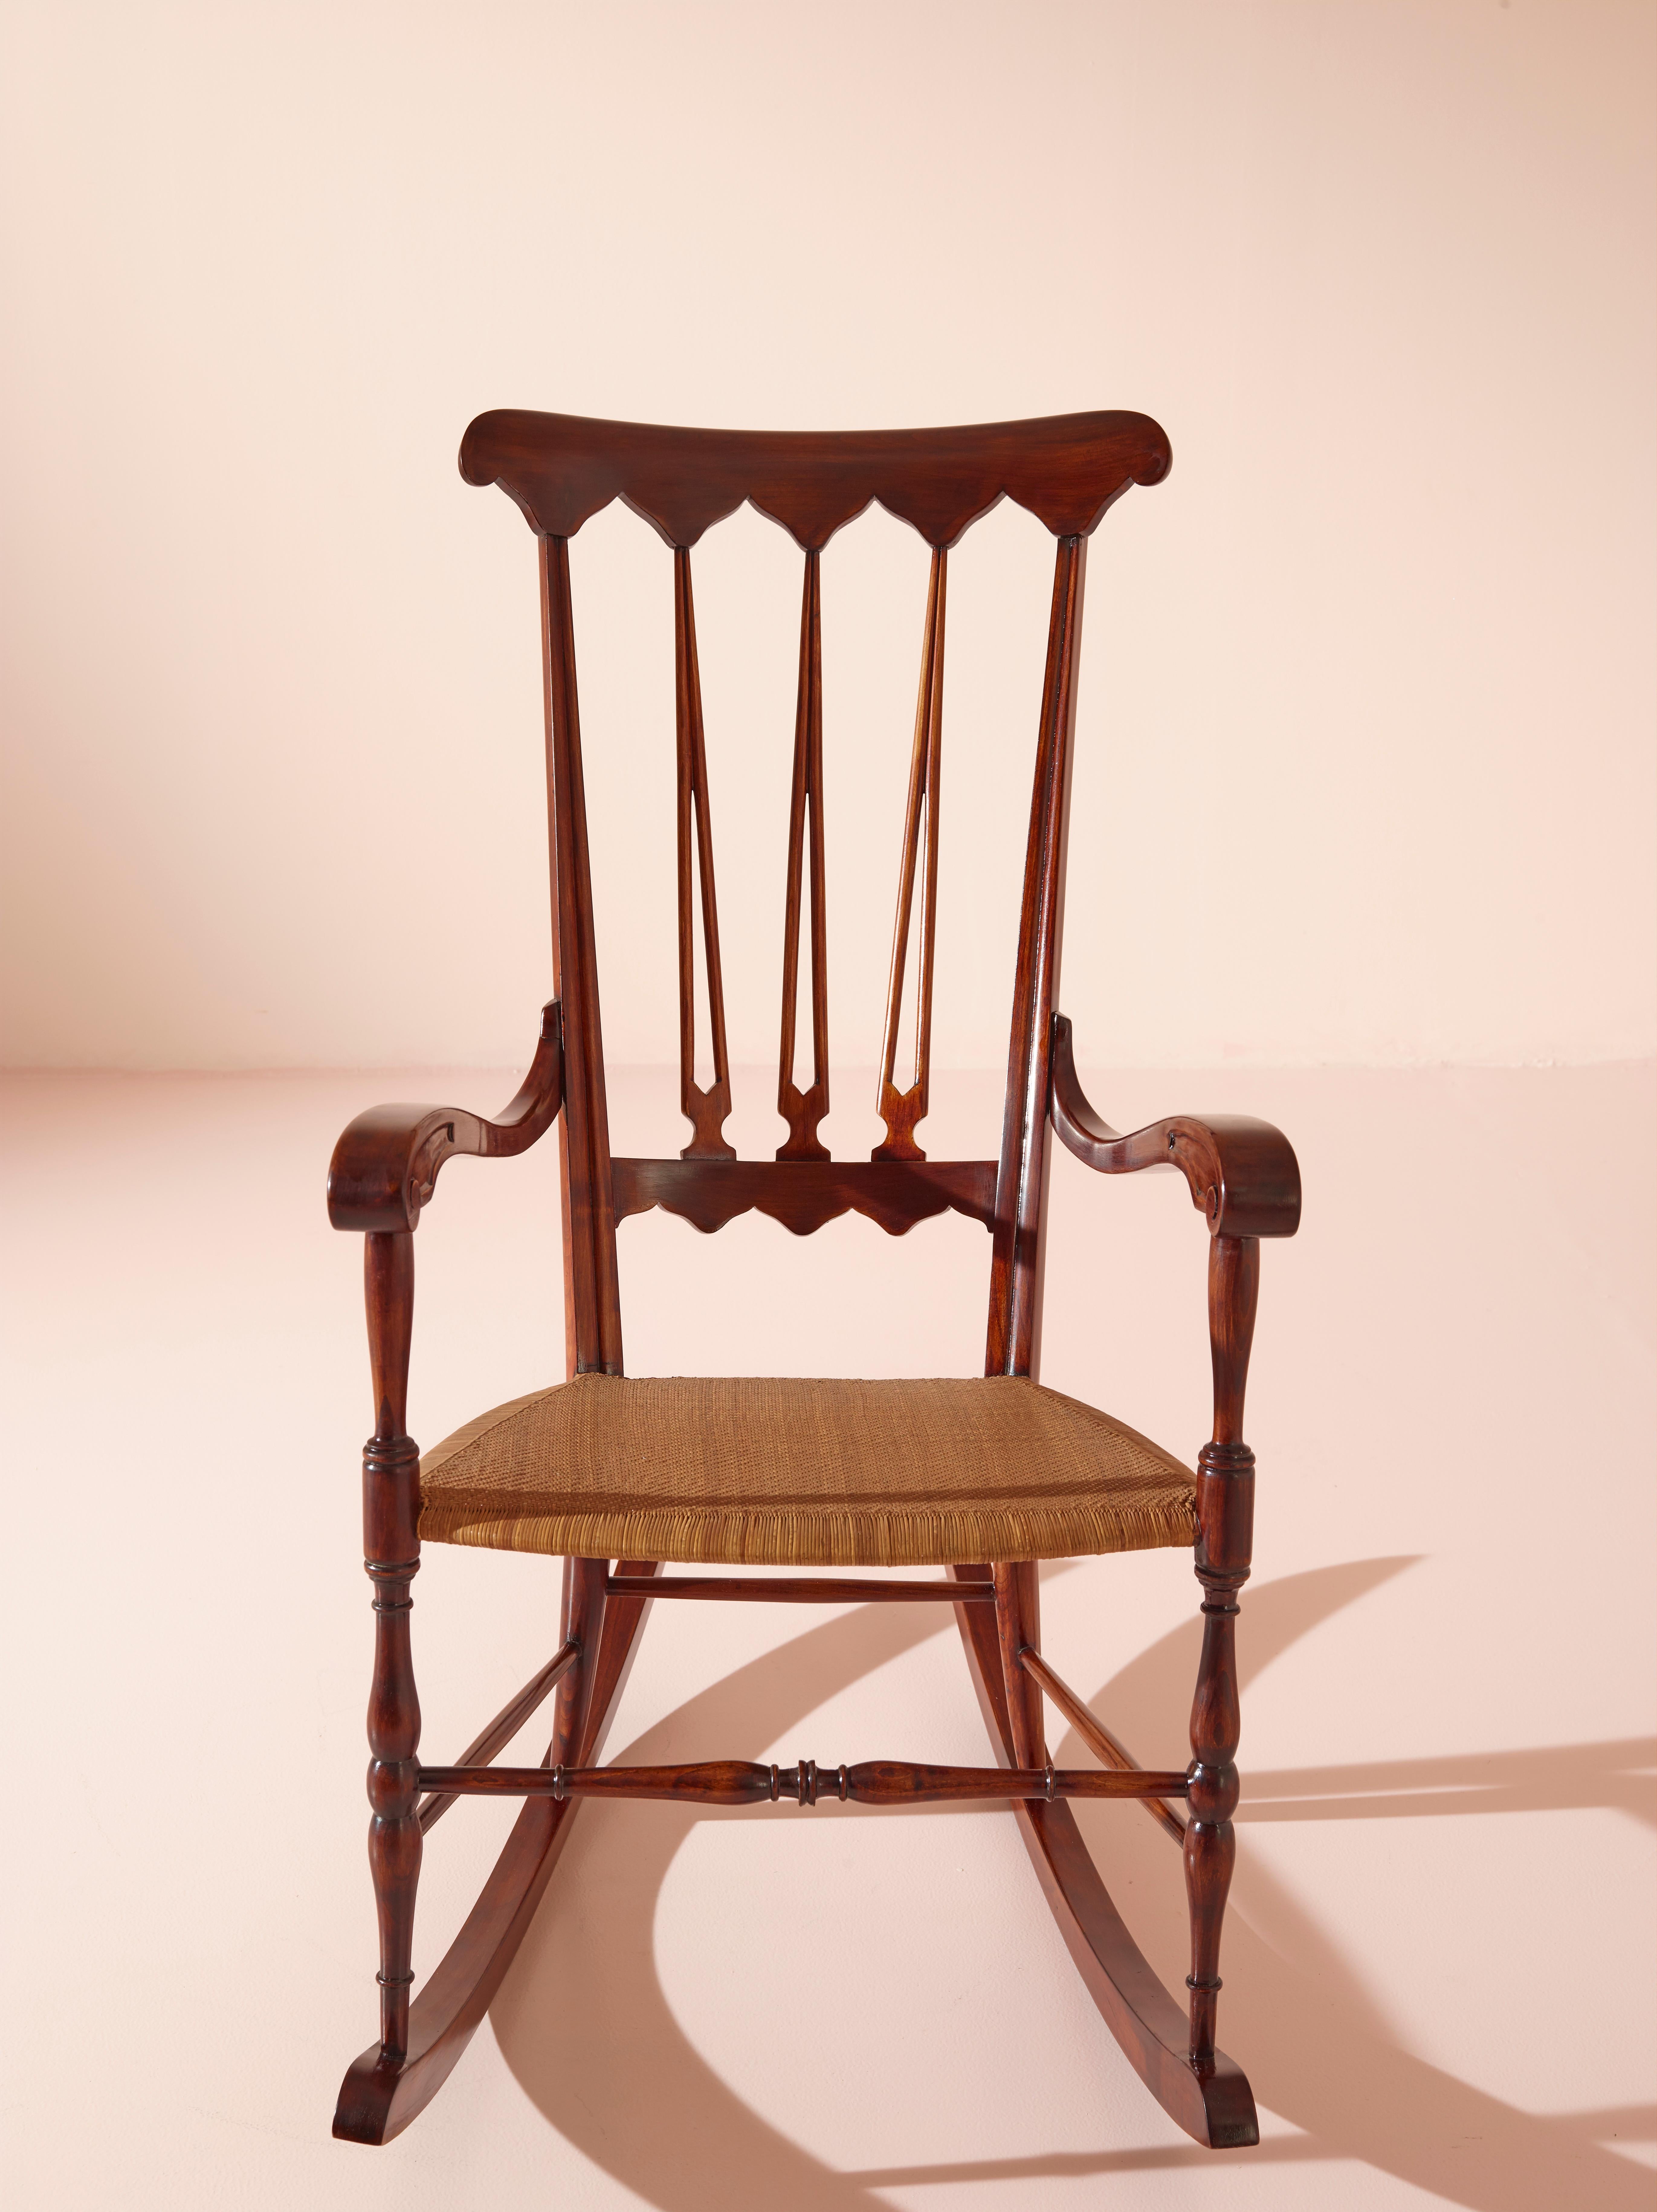 Straw Colombo Sanguineti rocking chair made of beech and woven straw, Chiavari, 1940s For Sale